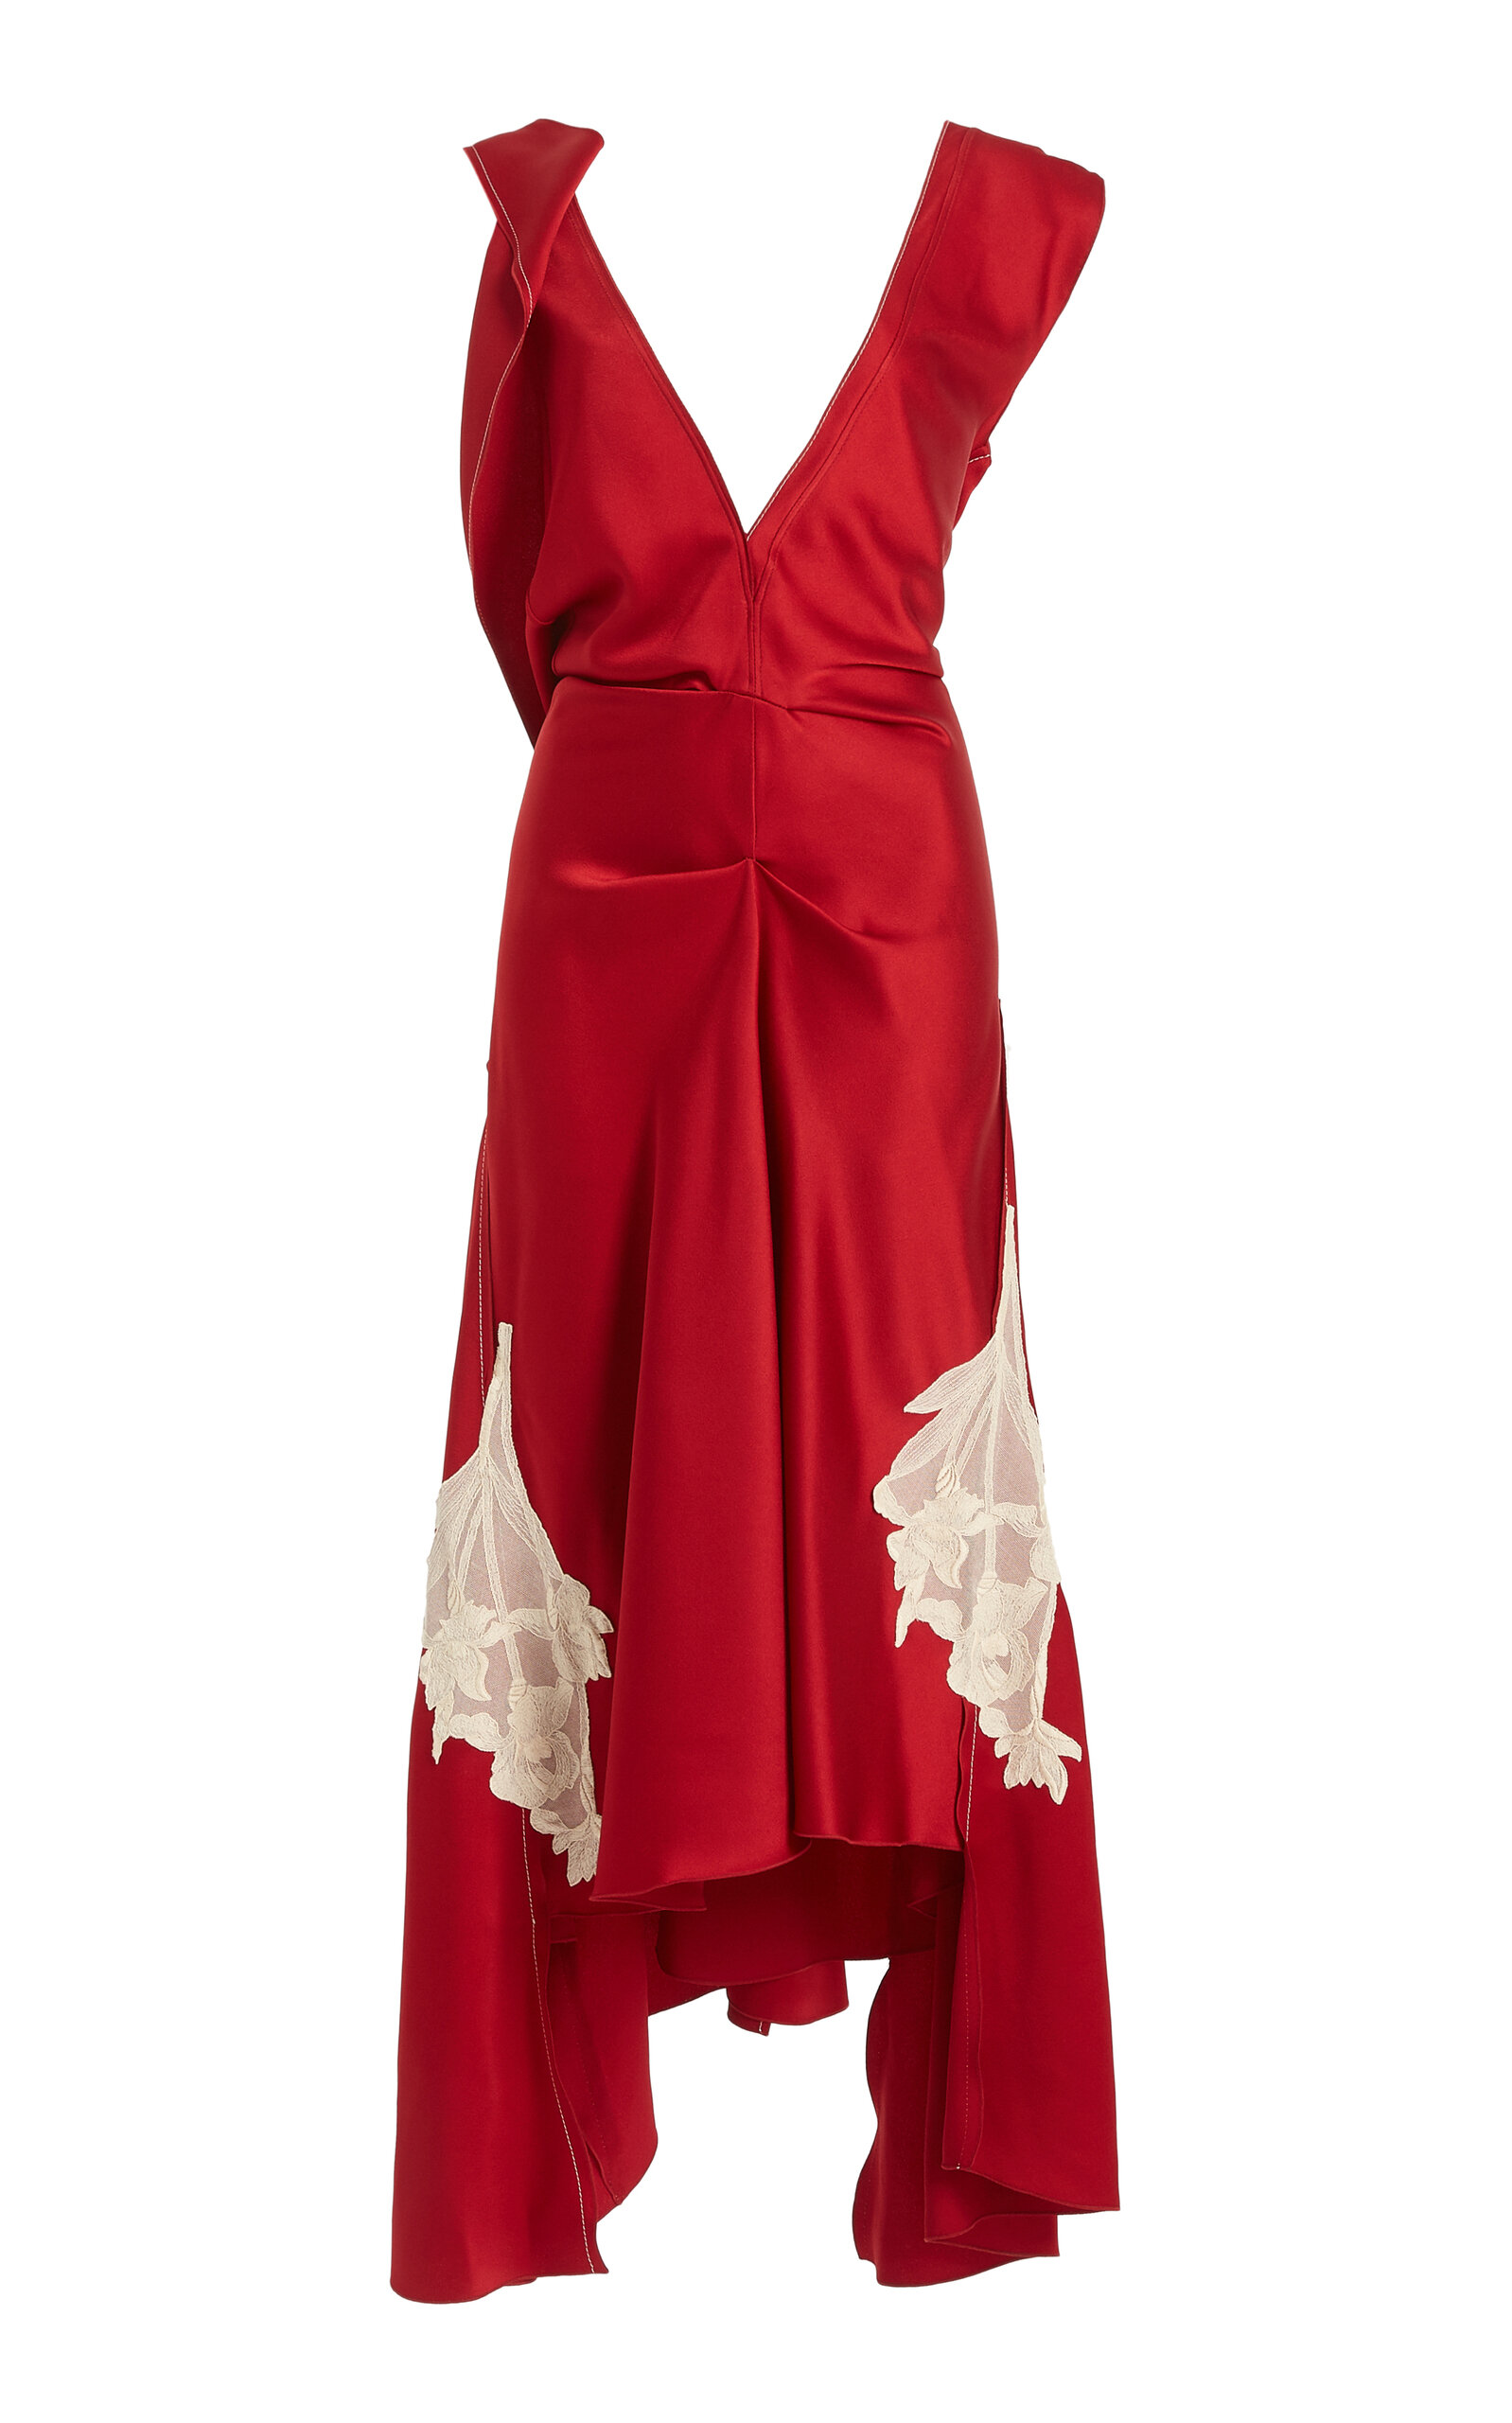 Victoria Beckham Women's Draped Lace Detail Midi Dress In Red